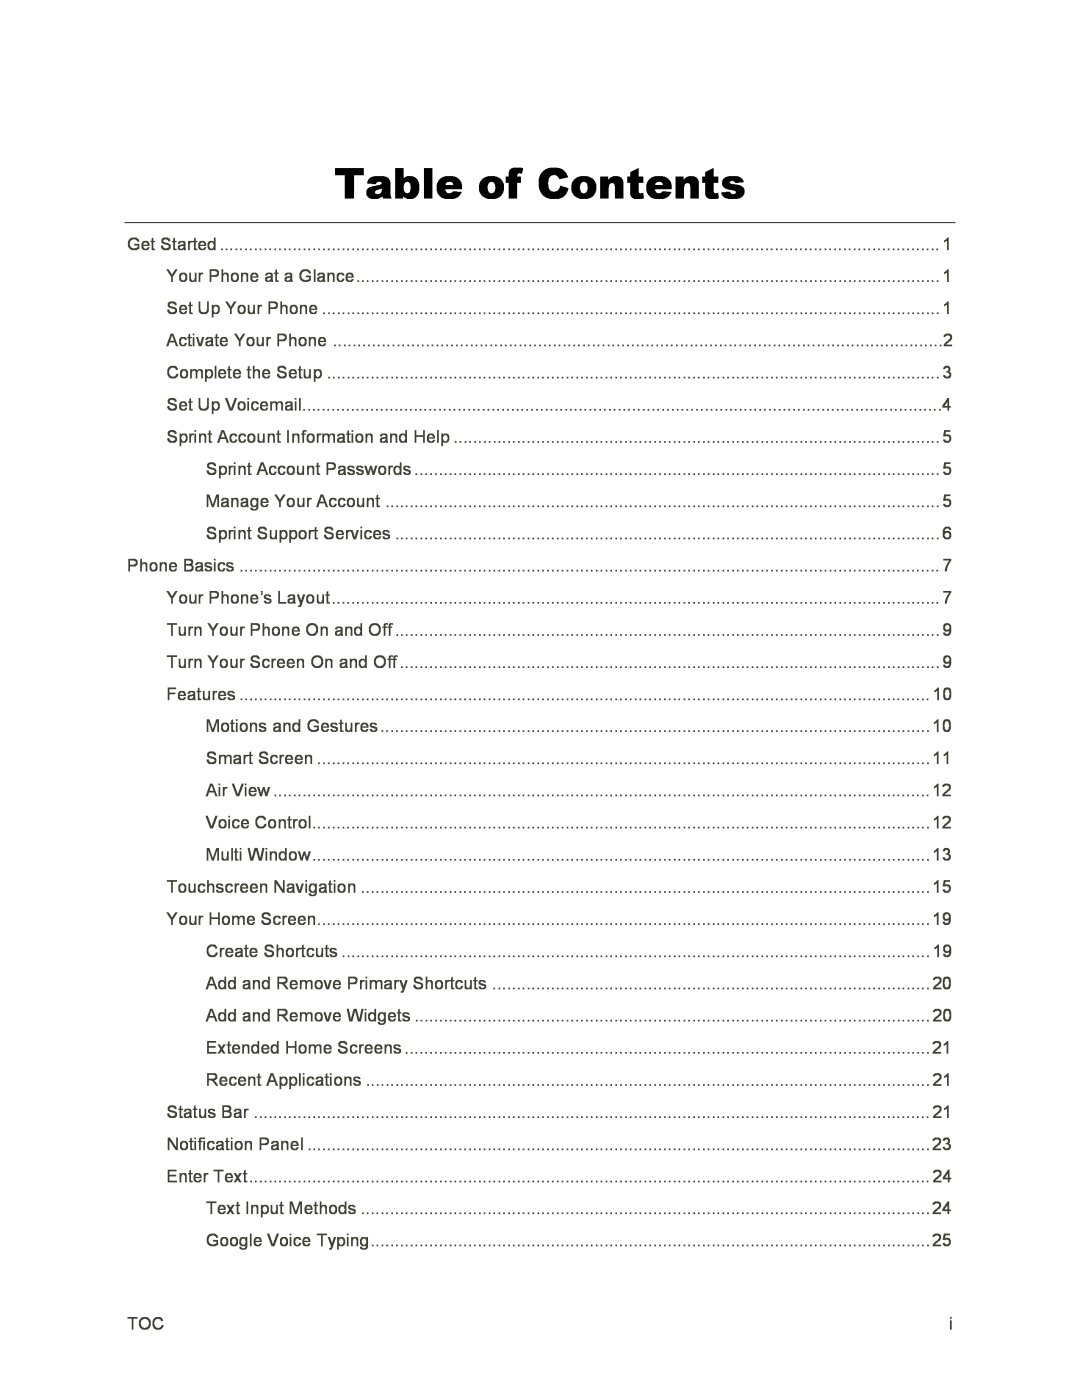 Table of Contents Galaxy S4 Sprint